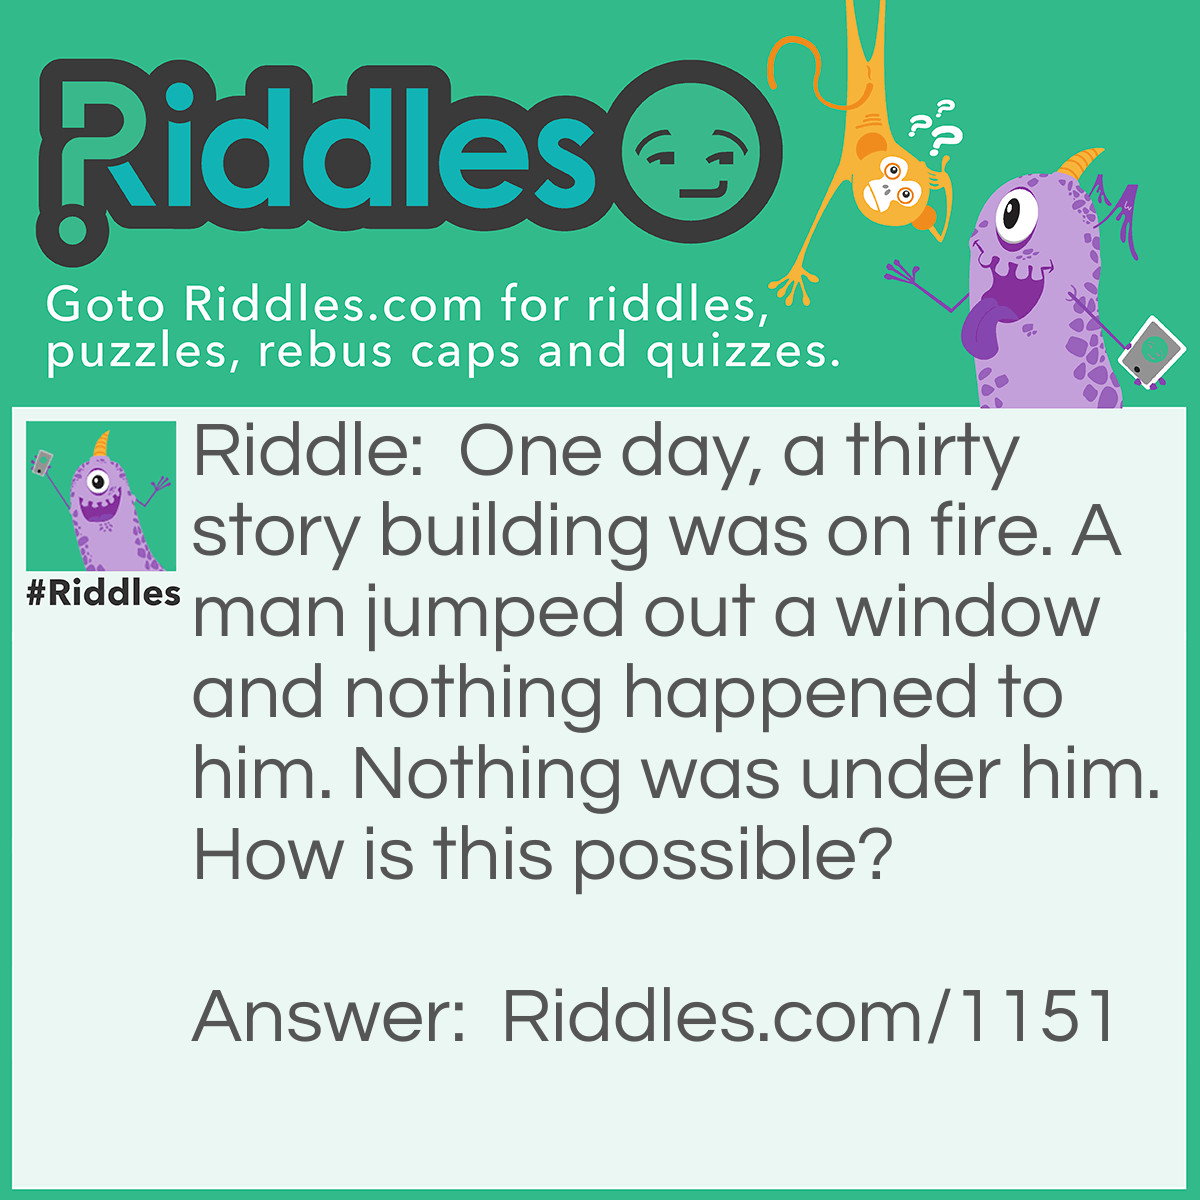 Riddle: One day, a thirty-story building was on fire. A man jumped out a window and nothing happened to him. Nothing was under him. How is this possible? Answer: He was first floor.